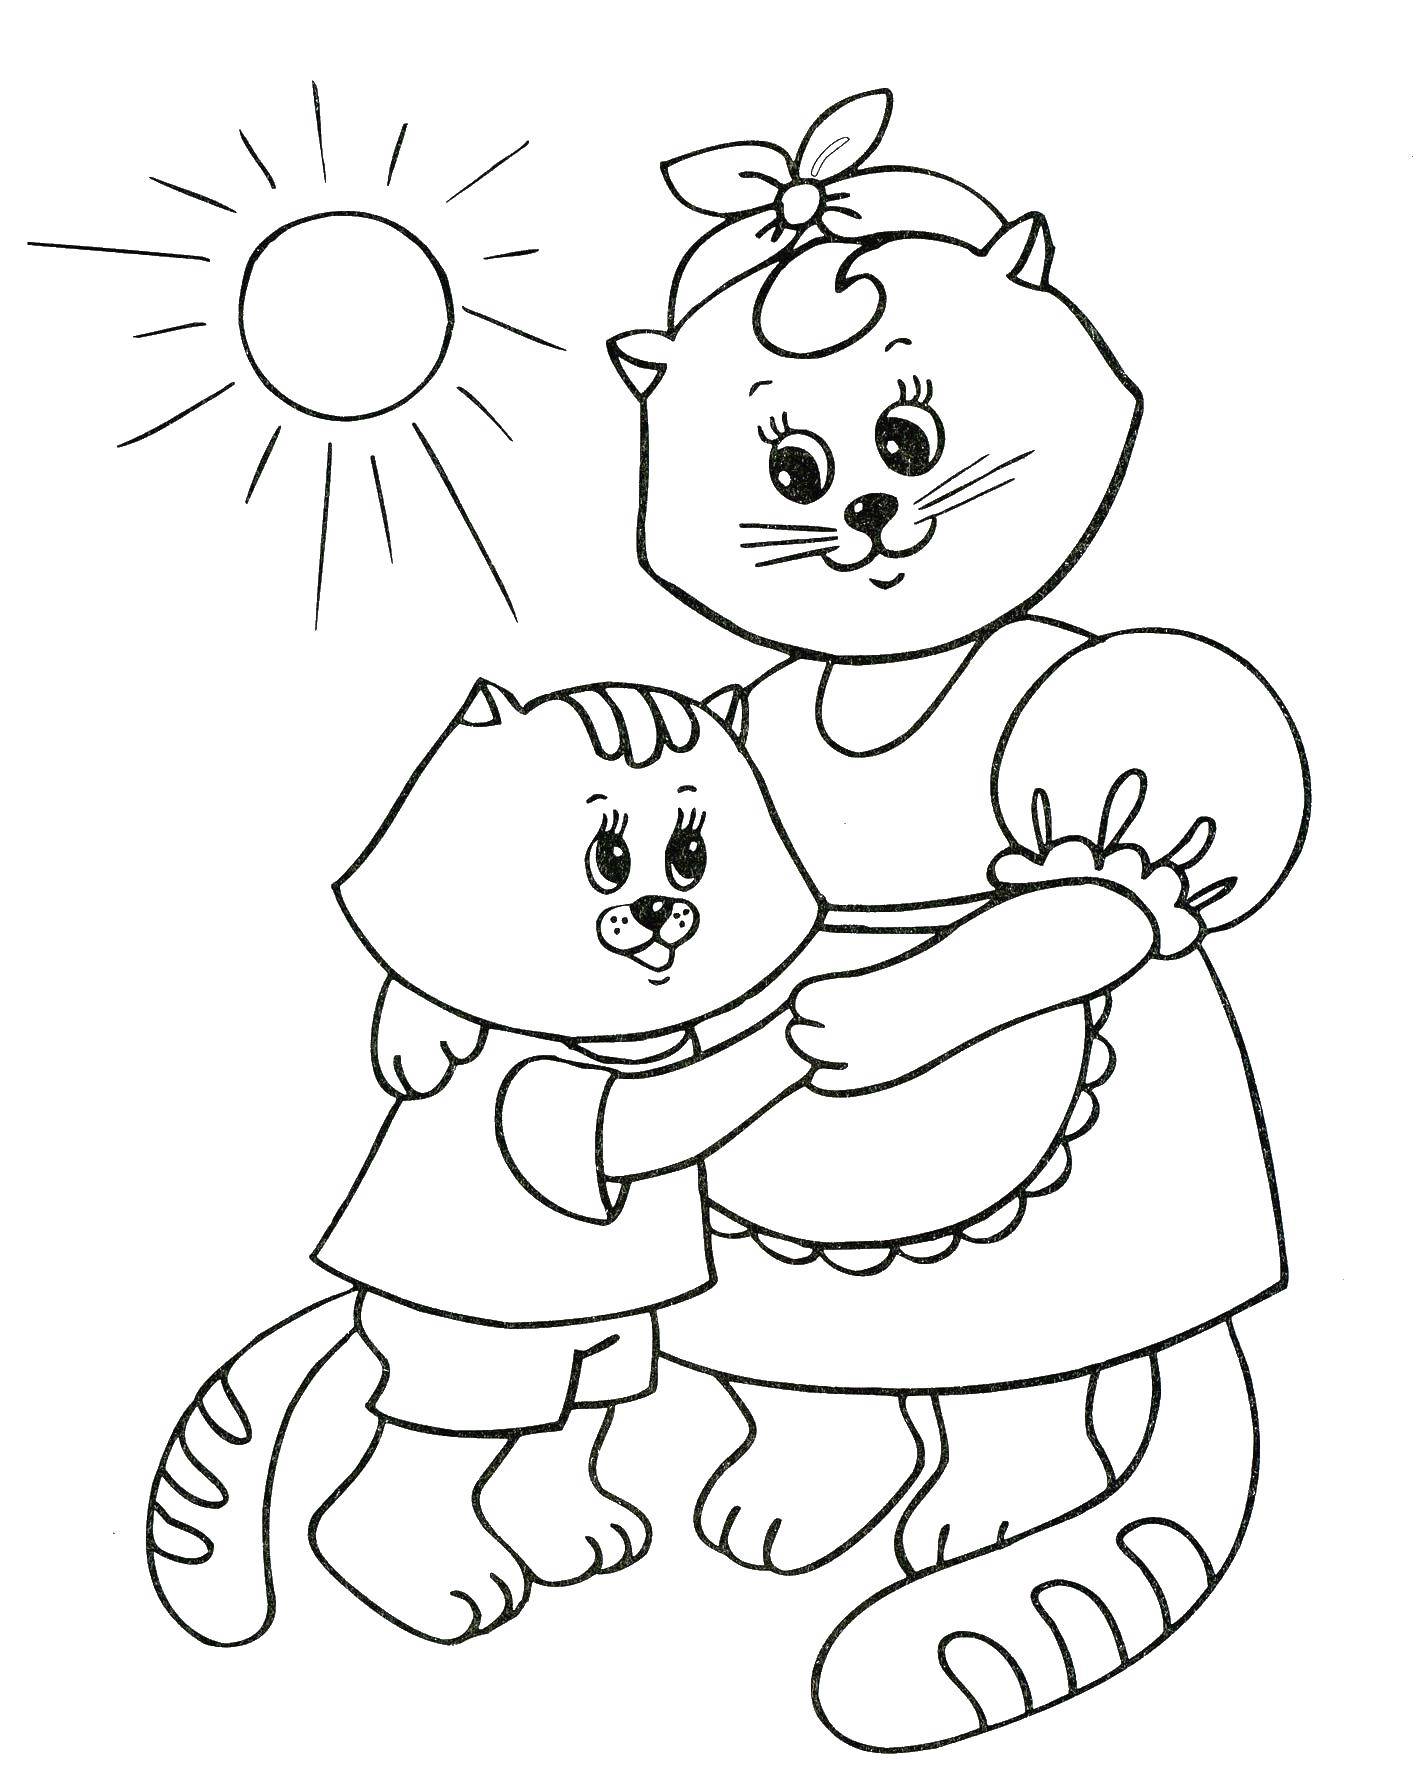 Coloring Mother cat and kitten. Category Pets allowed. Tags:  cat, kitten.